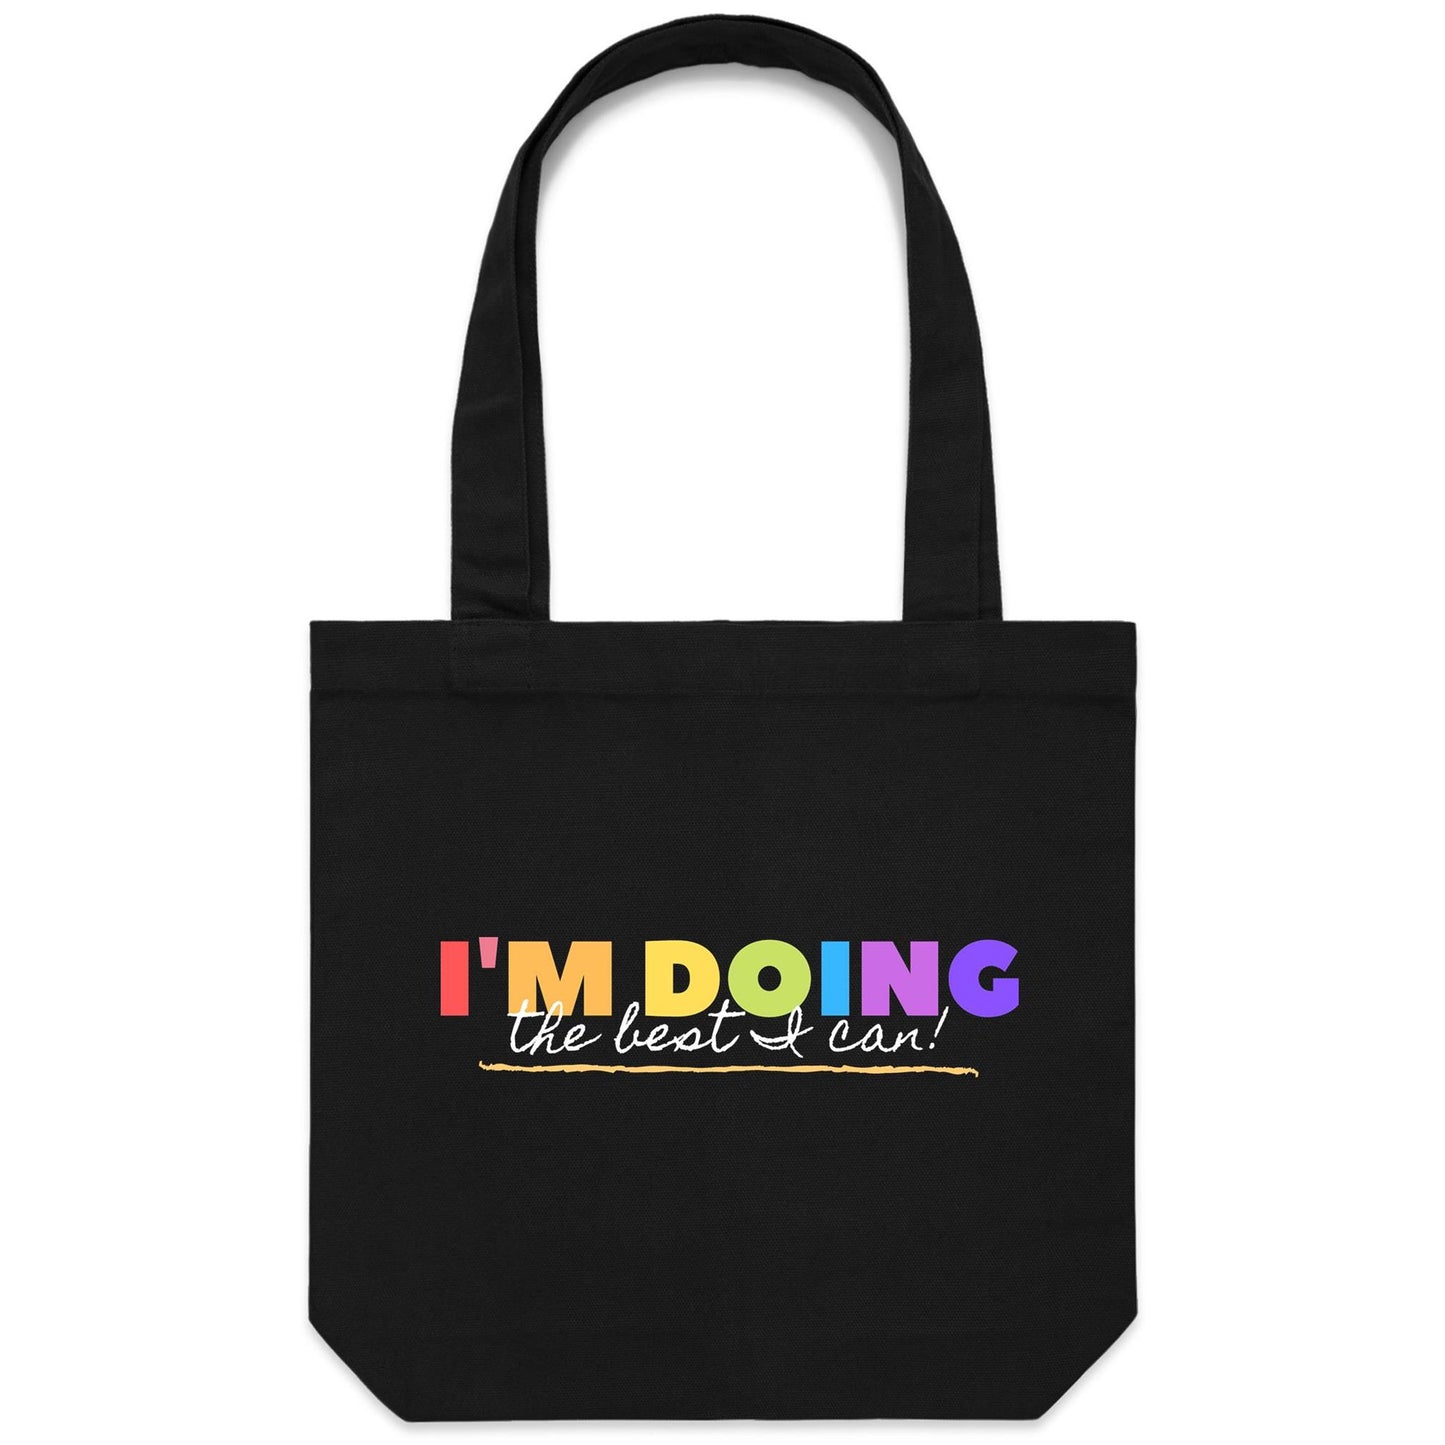 I'm Doing The Best I Can - Canvas Tote Bag Black One Size Tote Bag Motivation